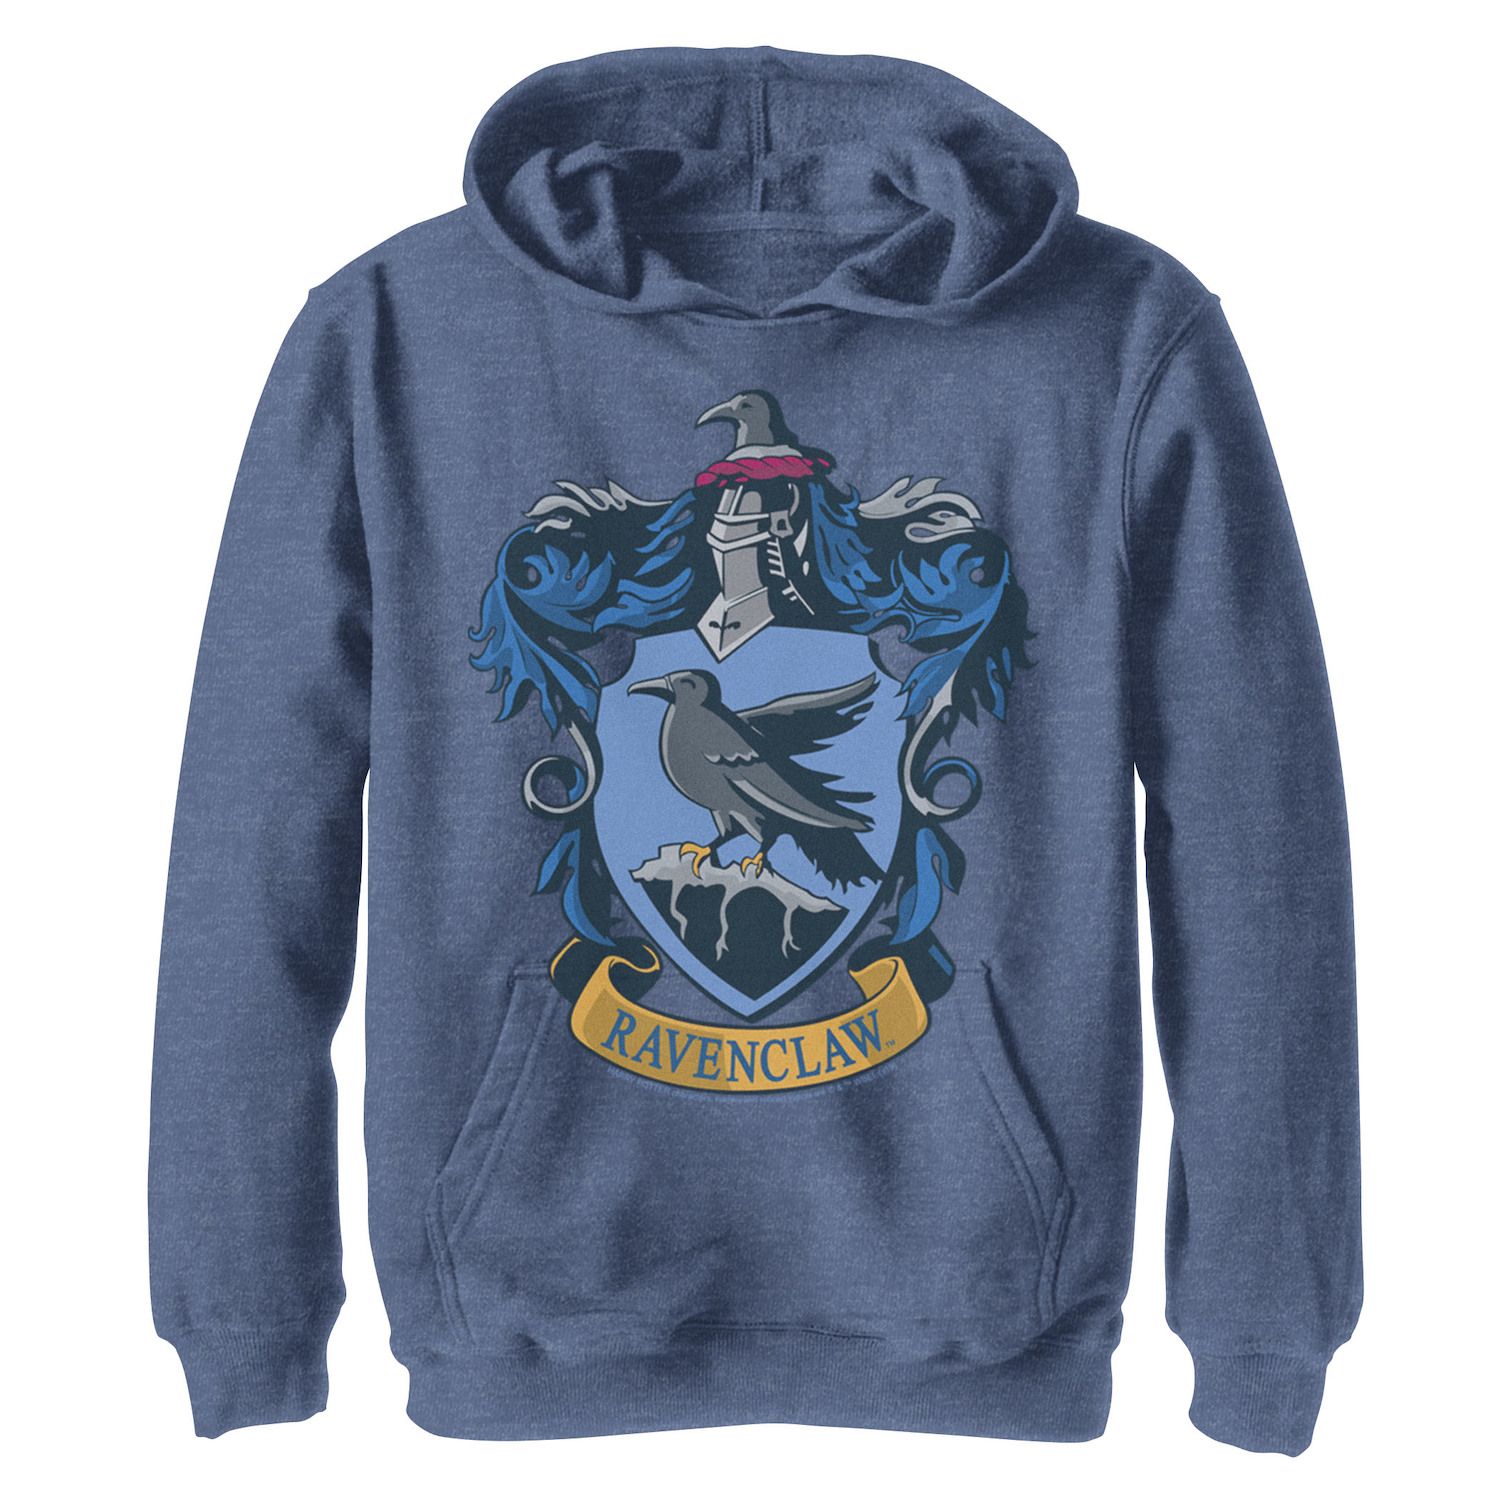 Image for Harry Potter Boys 8-20 Ravenclaw House Crest Graphic Fleece Hoodie at Kohl's.